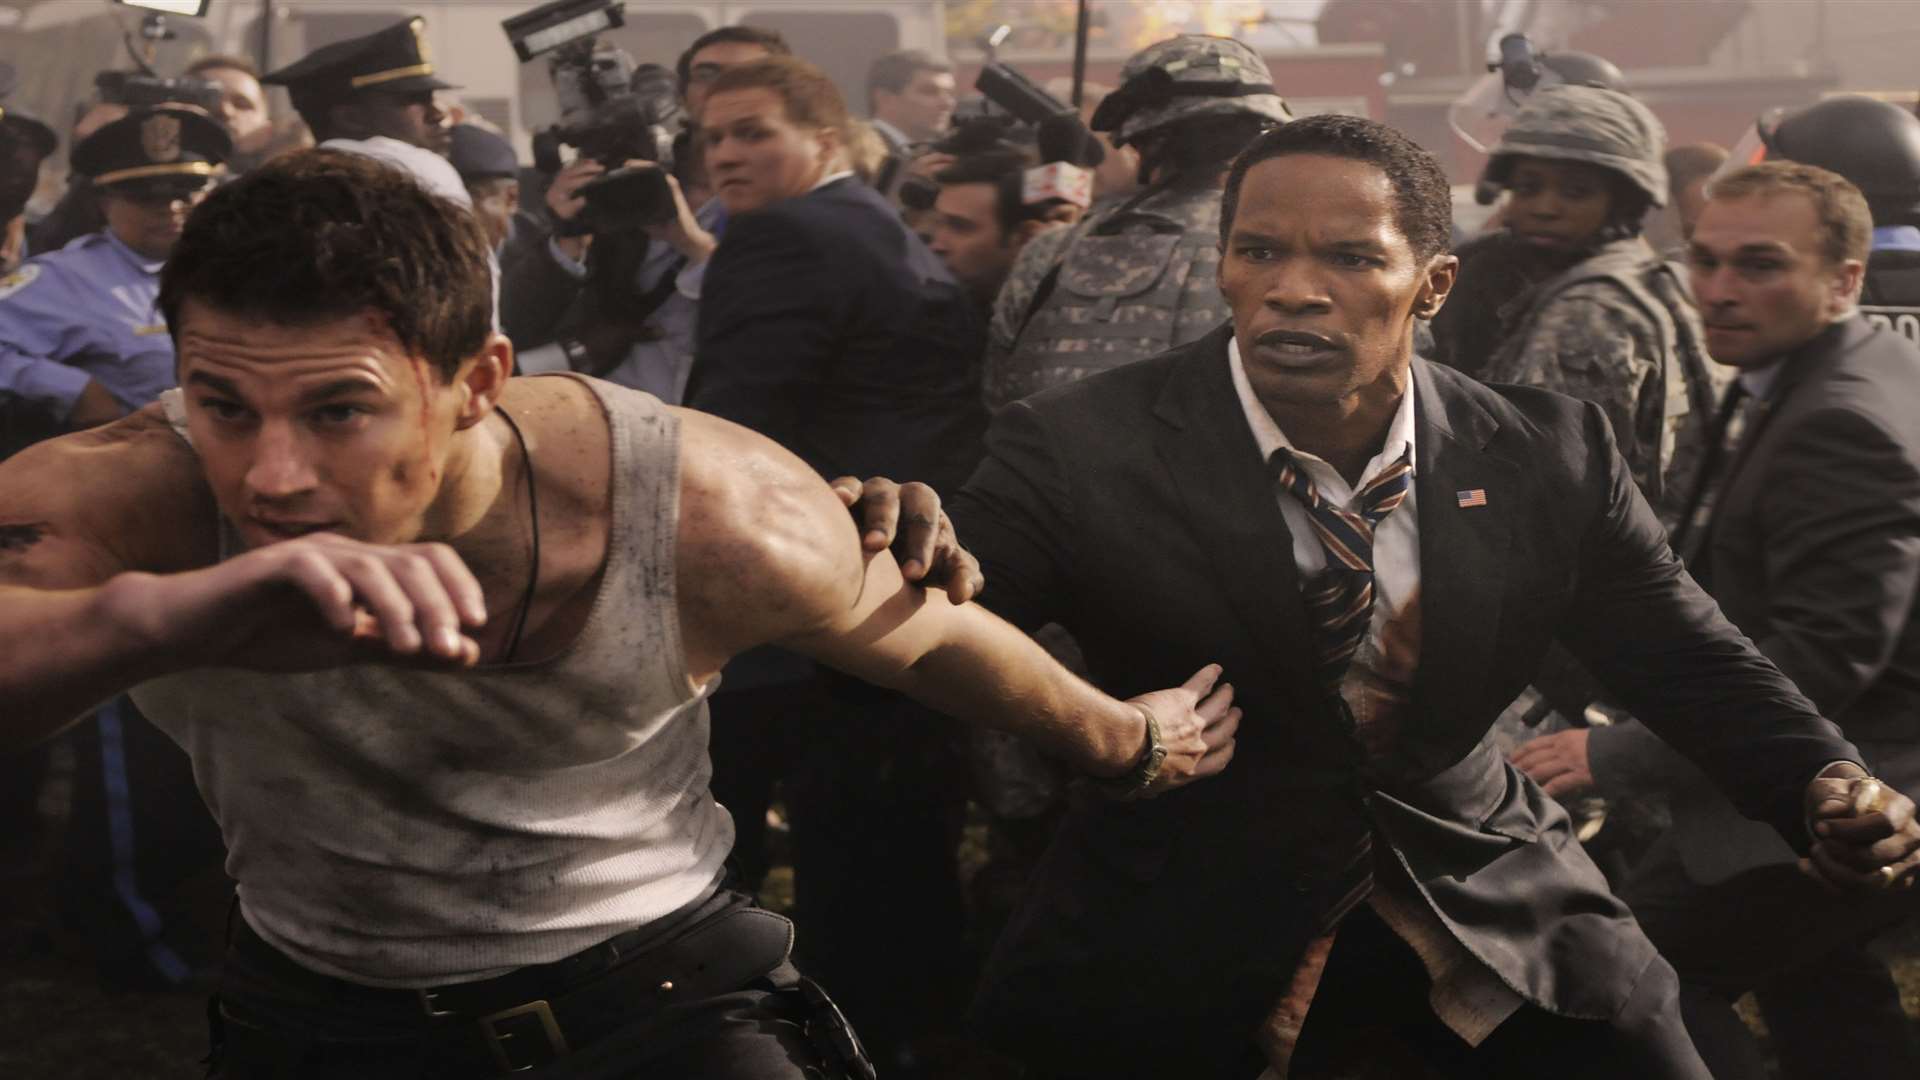 White House Down with Jamie Foxx as President Sawyer and Channing Tatum as Cale. Picture: PA Photo/Sony UK.